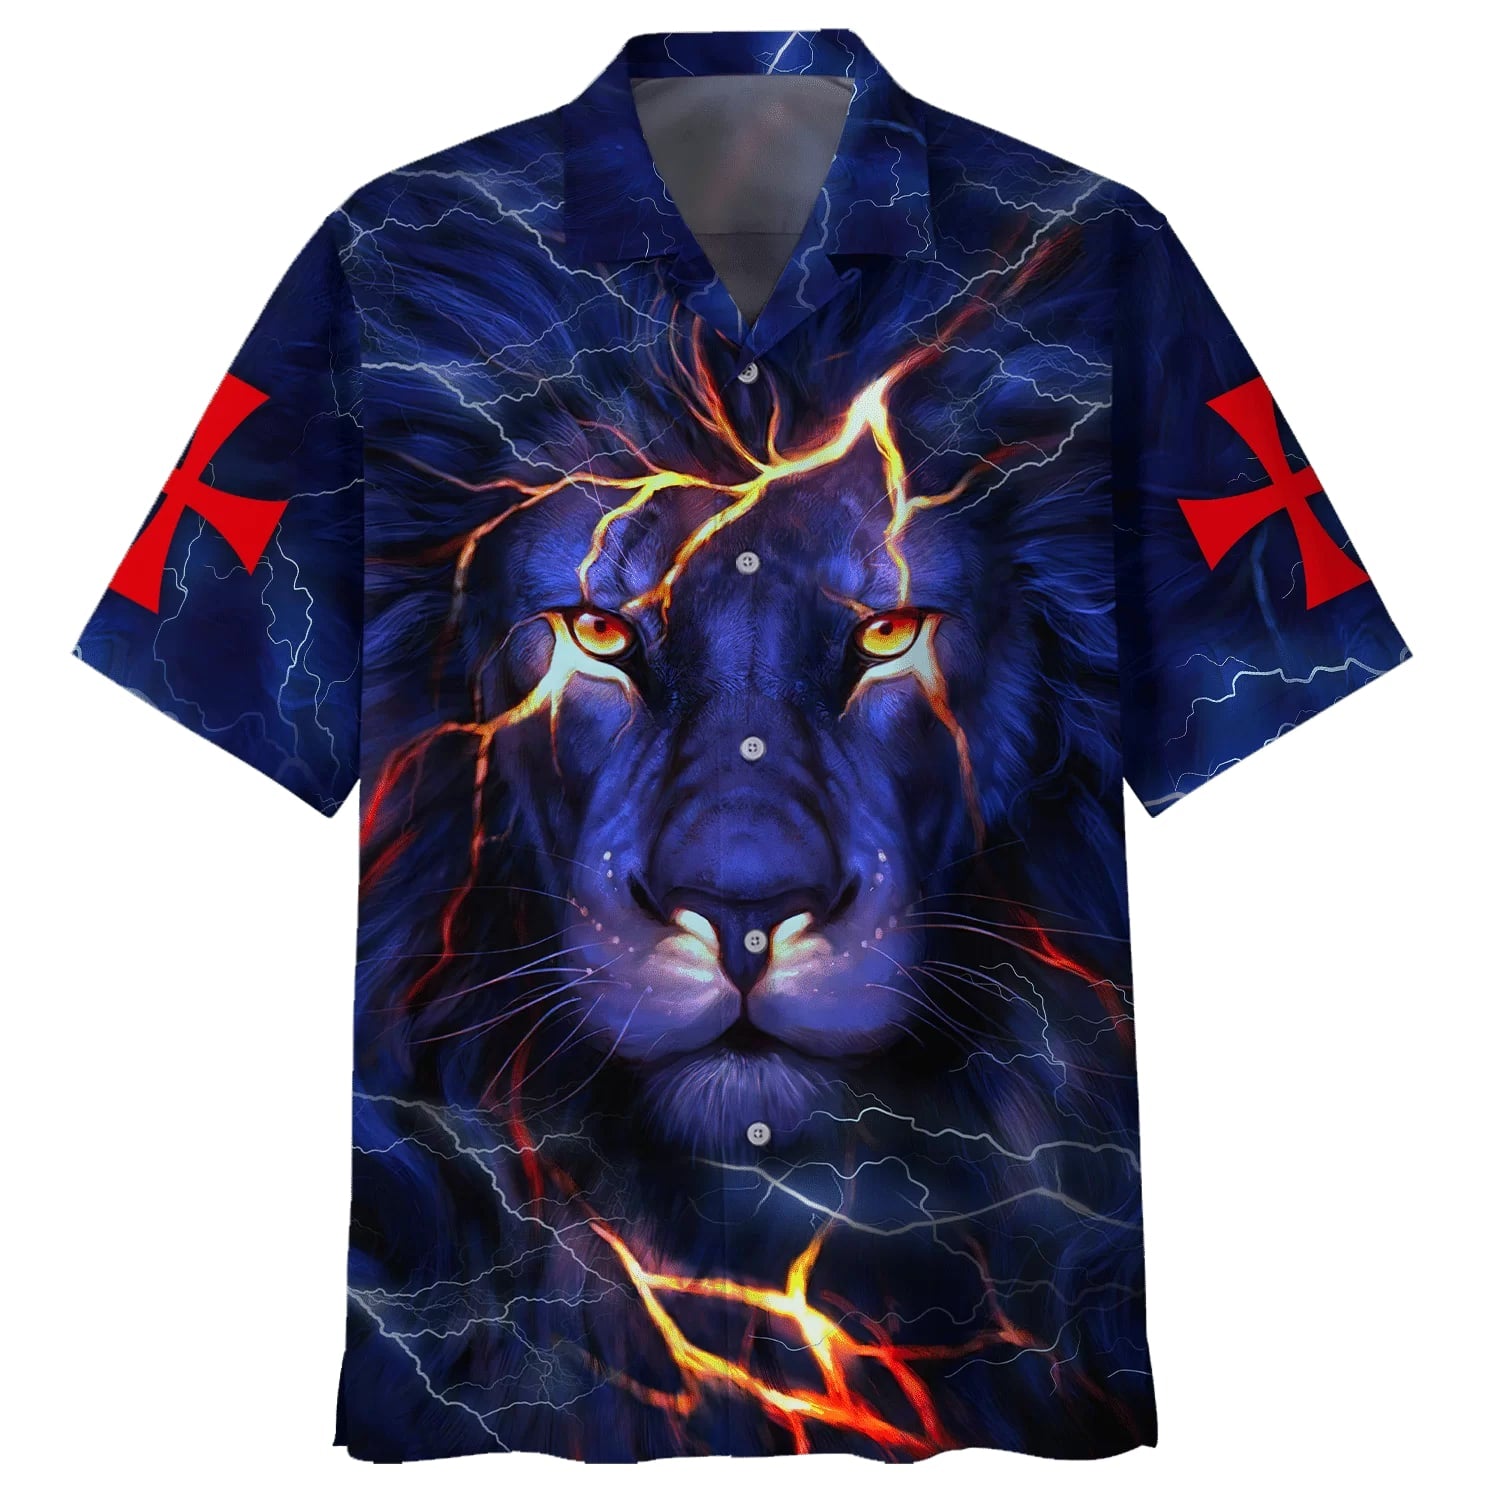 Way Maker Miracle Worker Promise Keeper Light In The Darkness My God That Is Who You Are Lion Hawaiian Shirt - Best Hawaiian Shirts - Christian Hawaiian Shirt